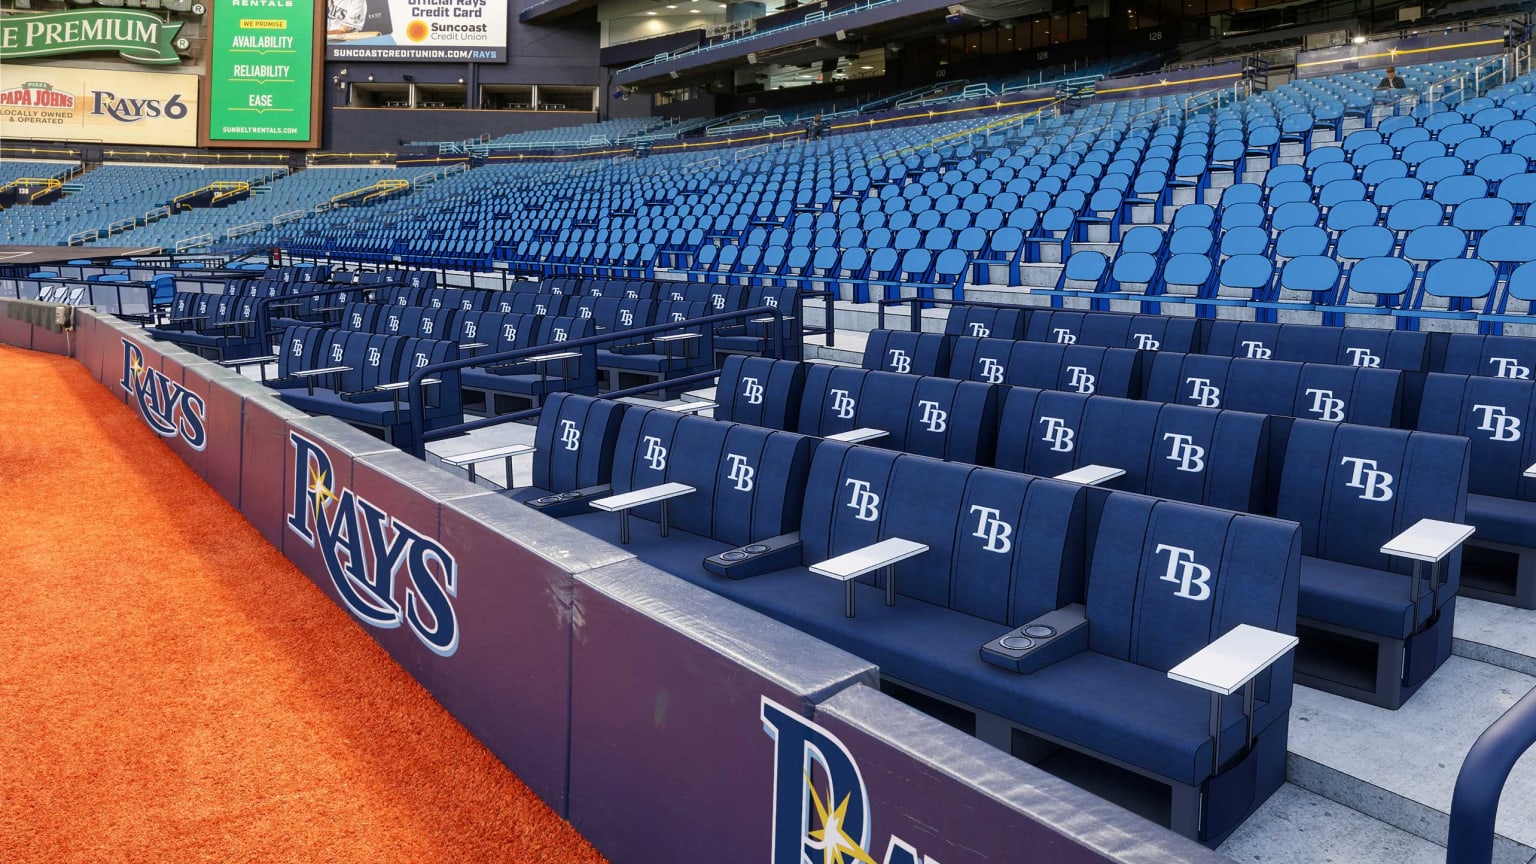 Tropicana Field Seating Chart With Row Numbers My Bios